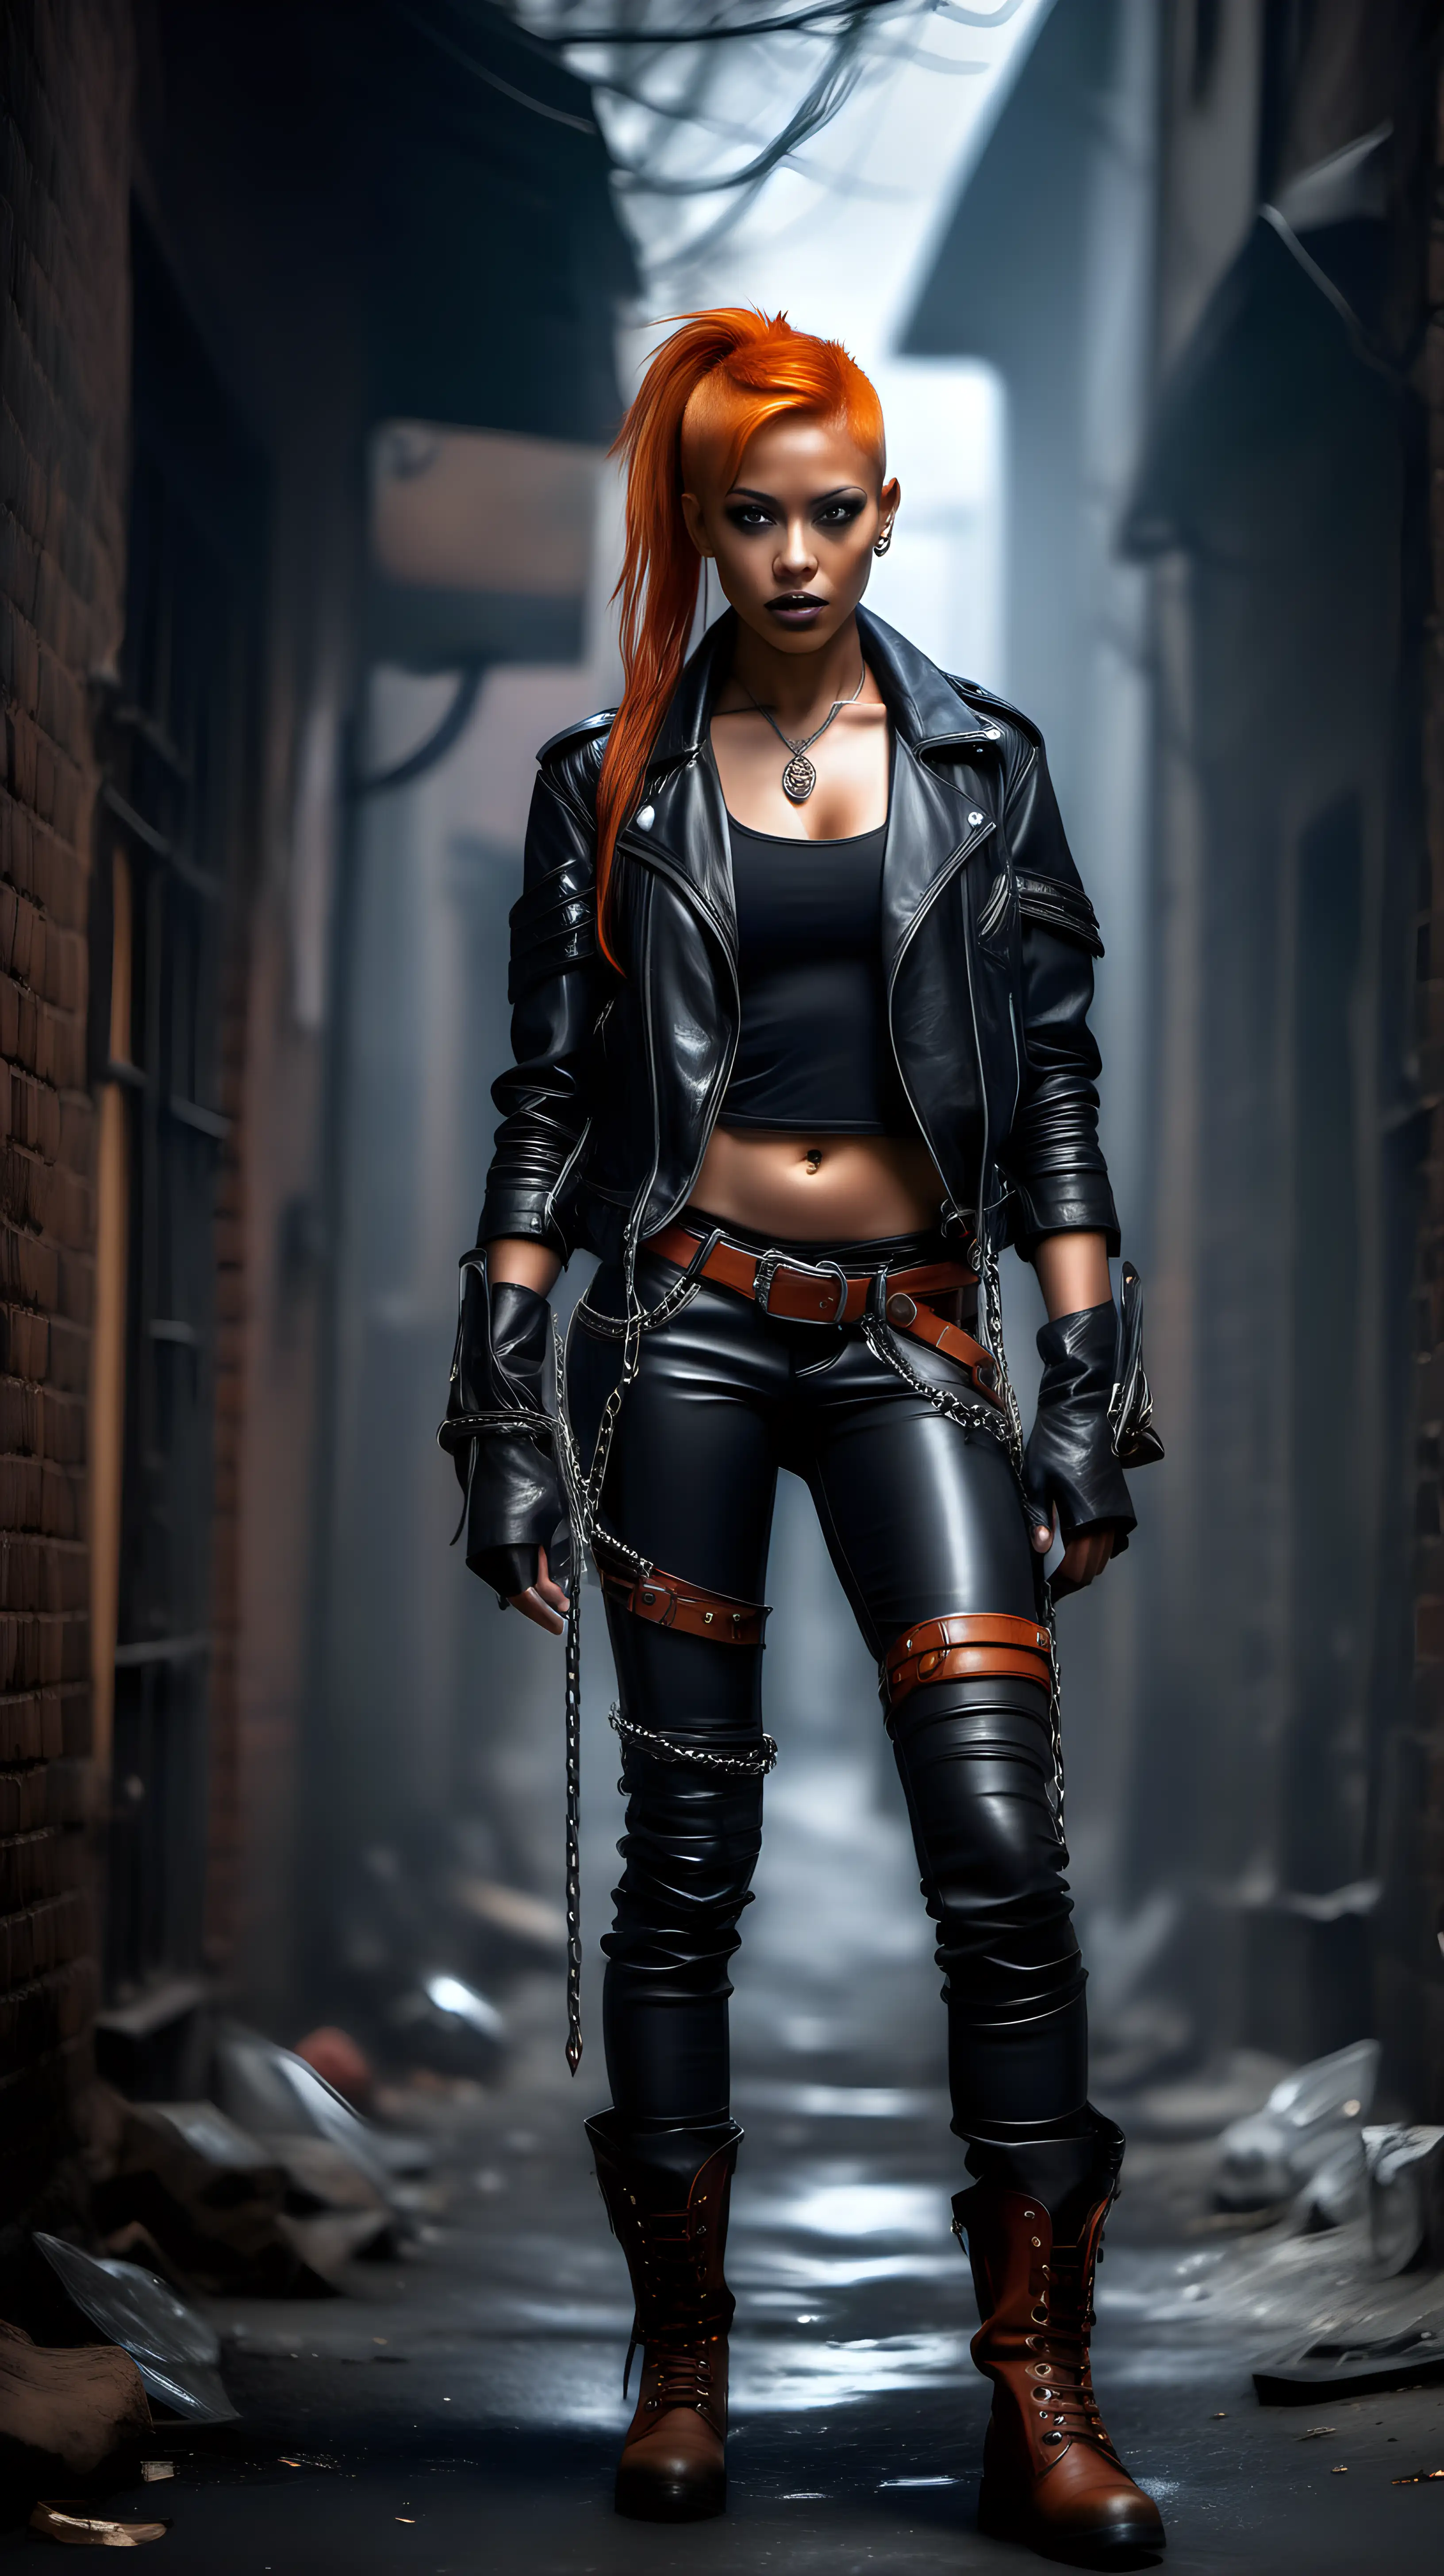 Muscular petite rogue with leather clothes and orange hair, brown skin, pony tail, amulet on a silver chain, leather jacket, leather boots, leather pants, backpack, fantasy style, full length portrait, dark foggy alley